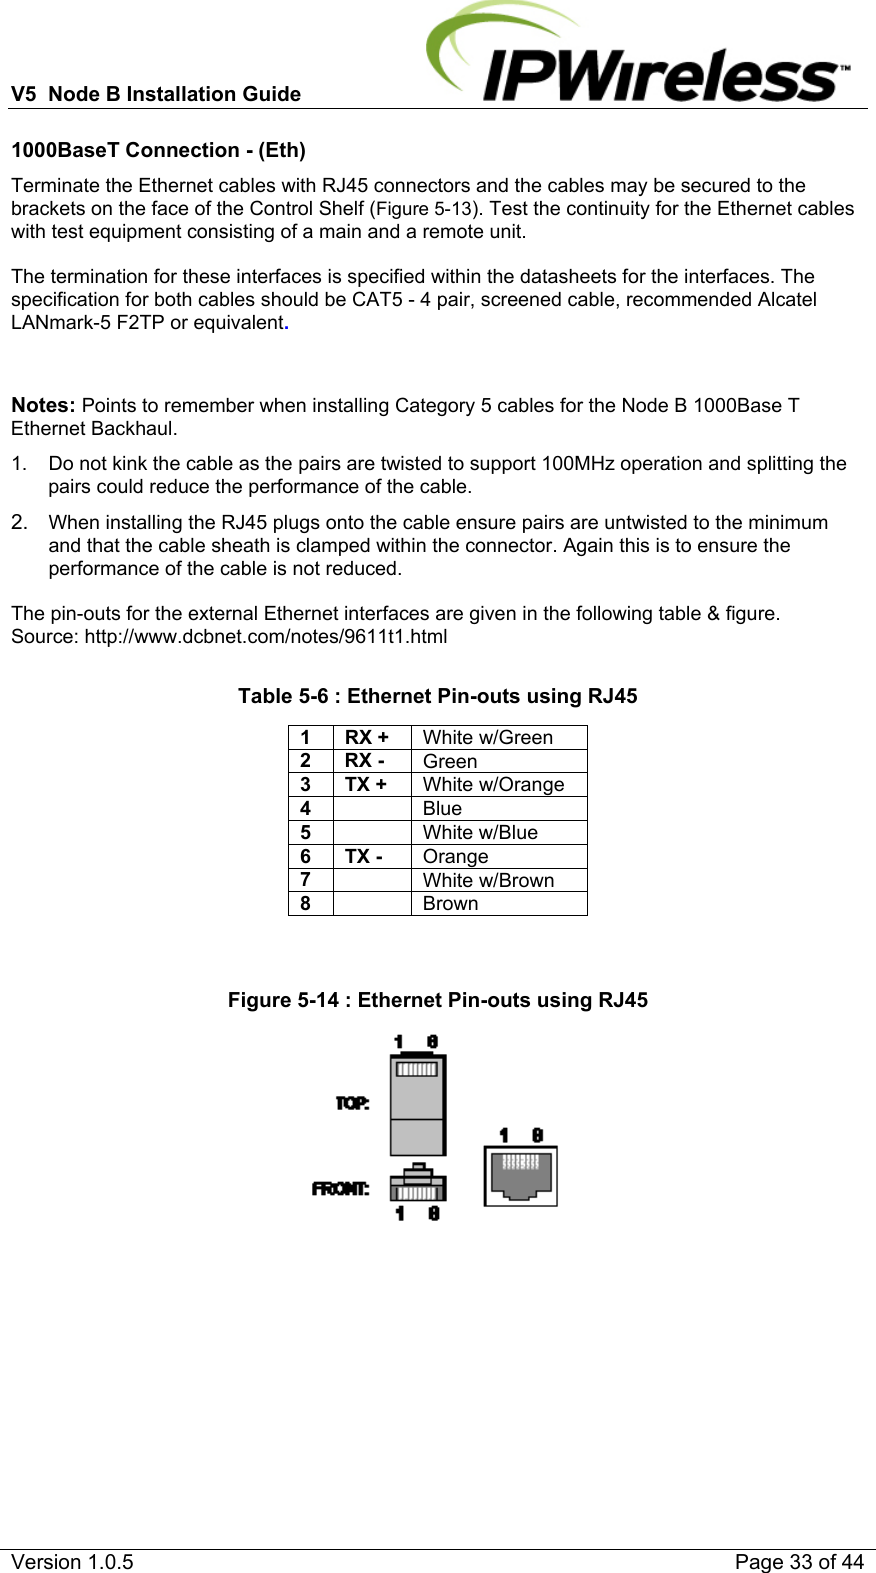 V5  Node B Installation Guide                           Version 1.0.5    Page 33 of 44 1000BaseT Connection - (Eth) Terminate the Ethernet cables with RJ45 connectors and the cables may be secured to the brackets on the face of the Control Shelf (Figure 5-13). Test the continuity for the Ethernet cables with test equipment consisting of a main and a remote unit.  The termination for these interfaces is specified within the datasheets for the interfaces. The specification for both cables should be CAT5 - 4 pair, screened cable, recommended Alcatel LANmark-5 F2TP or equivalent.   Notes: Points to remember when installing Category 5 cables for the Node B 1000Base T Ethernet Backhaul. 1.  Do not kink the cable as the pairs are twisted to support 100MHz operation and splitting the pairs could reduce the performance of the cable. 2.  When installing the RJ45 plugs onto the cable ensure pairs are untwisted to the minimum and that the cable sheath is clamped within the connector. Again this is to ensure the performance of the cable is not reduced.  The pin-outs for the external Ethernet interfaces are given in the following table &amp; figure. Source: http://www.dcbnet.com/notes/9611t1.html  Table 5-6 : Ethernet Pin-outs using RJ45 1 RX + White w/Green 2 RX -  Green3 TX + White w/Orange4   Blue5   White w/Blue6 TX -  Orange 7   White w/Brown8   Brown  Figure 5-14 : Ethernet Pin-outs using RJ45   